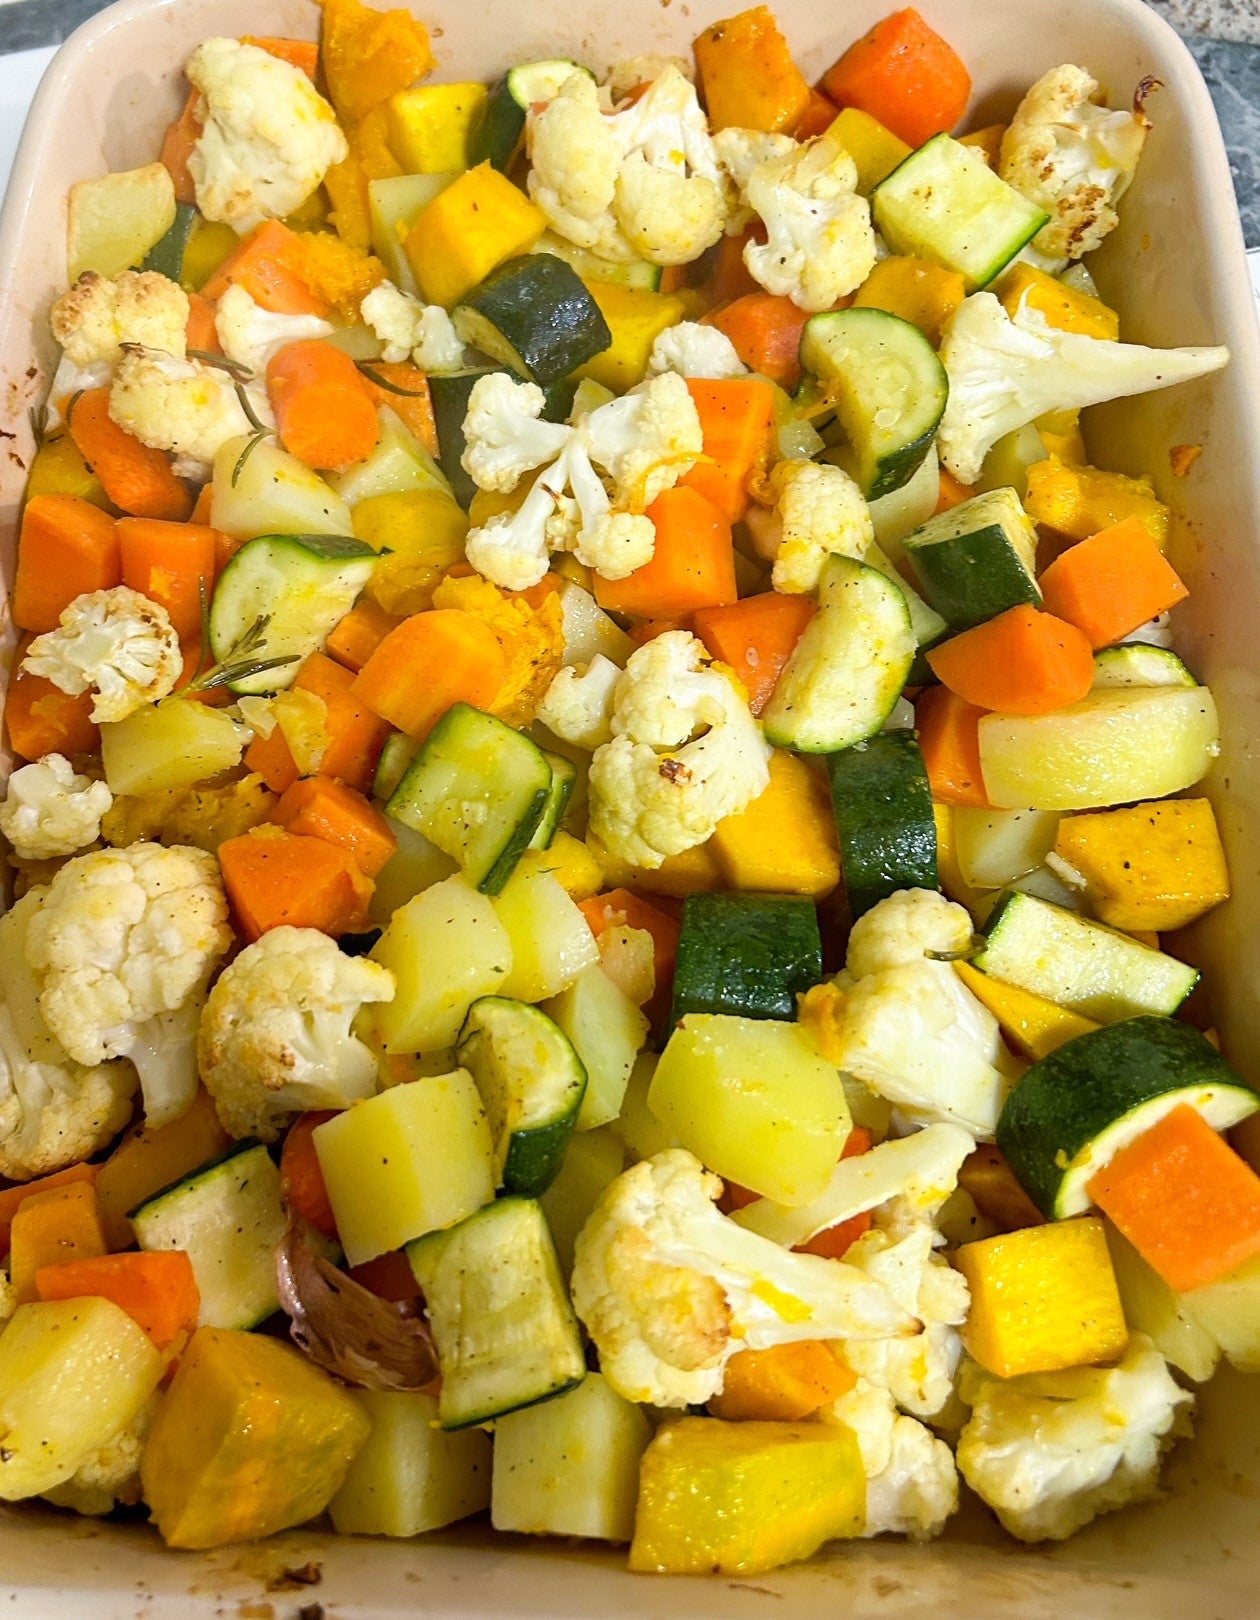 RECIPE: Baked Vegetables with Gin Salt